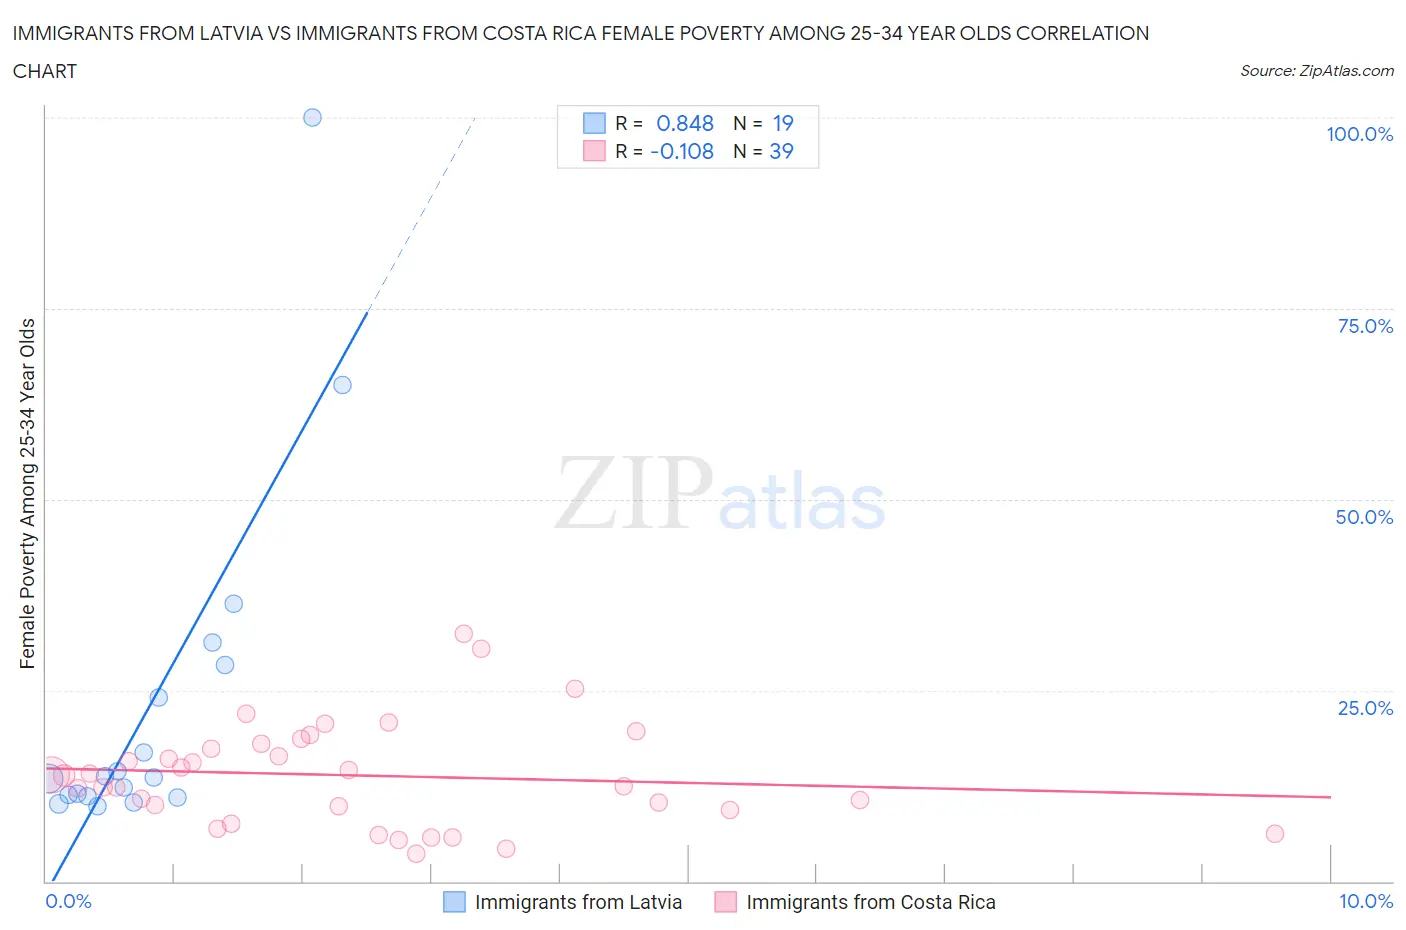 Immigrants from Latvia vs Immigrants from Costa Rica Female Poverty Among 25-34 Year Olds